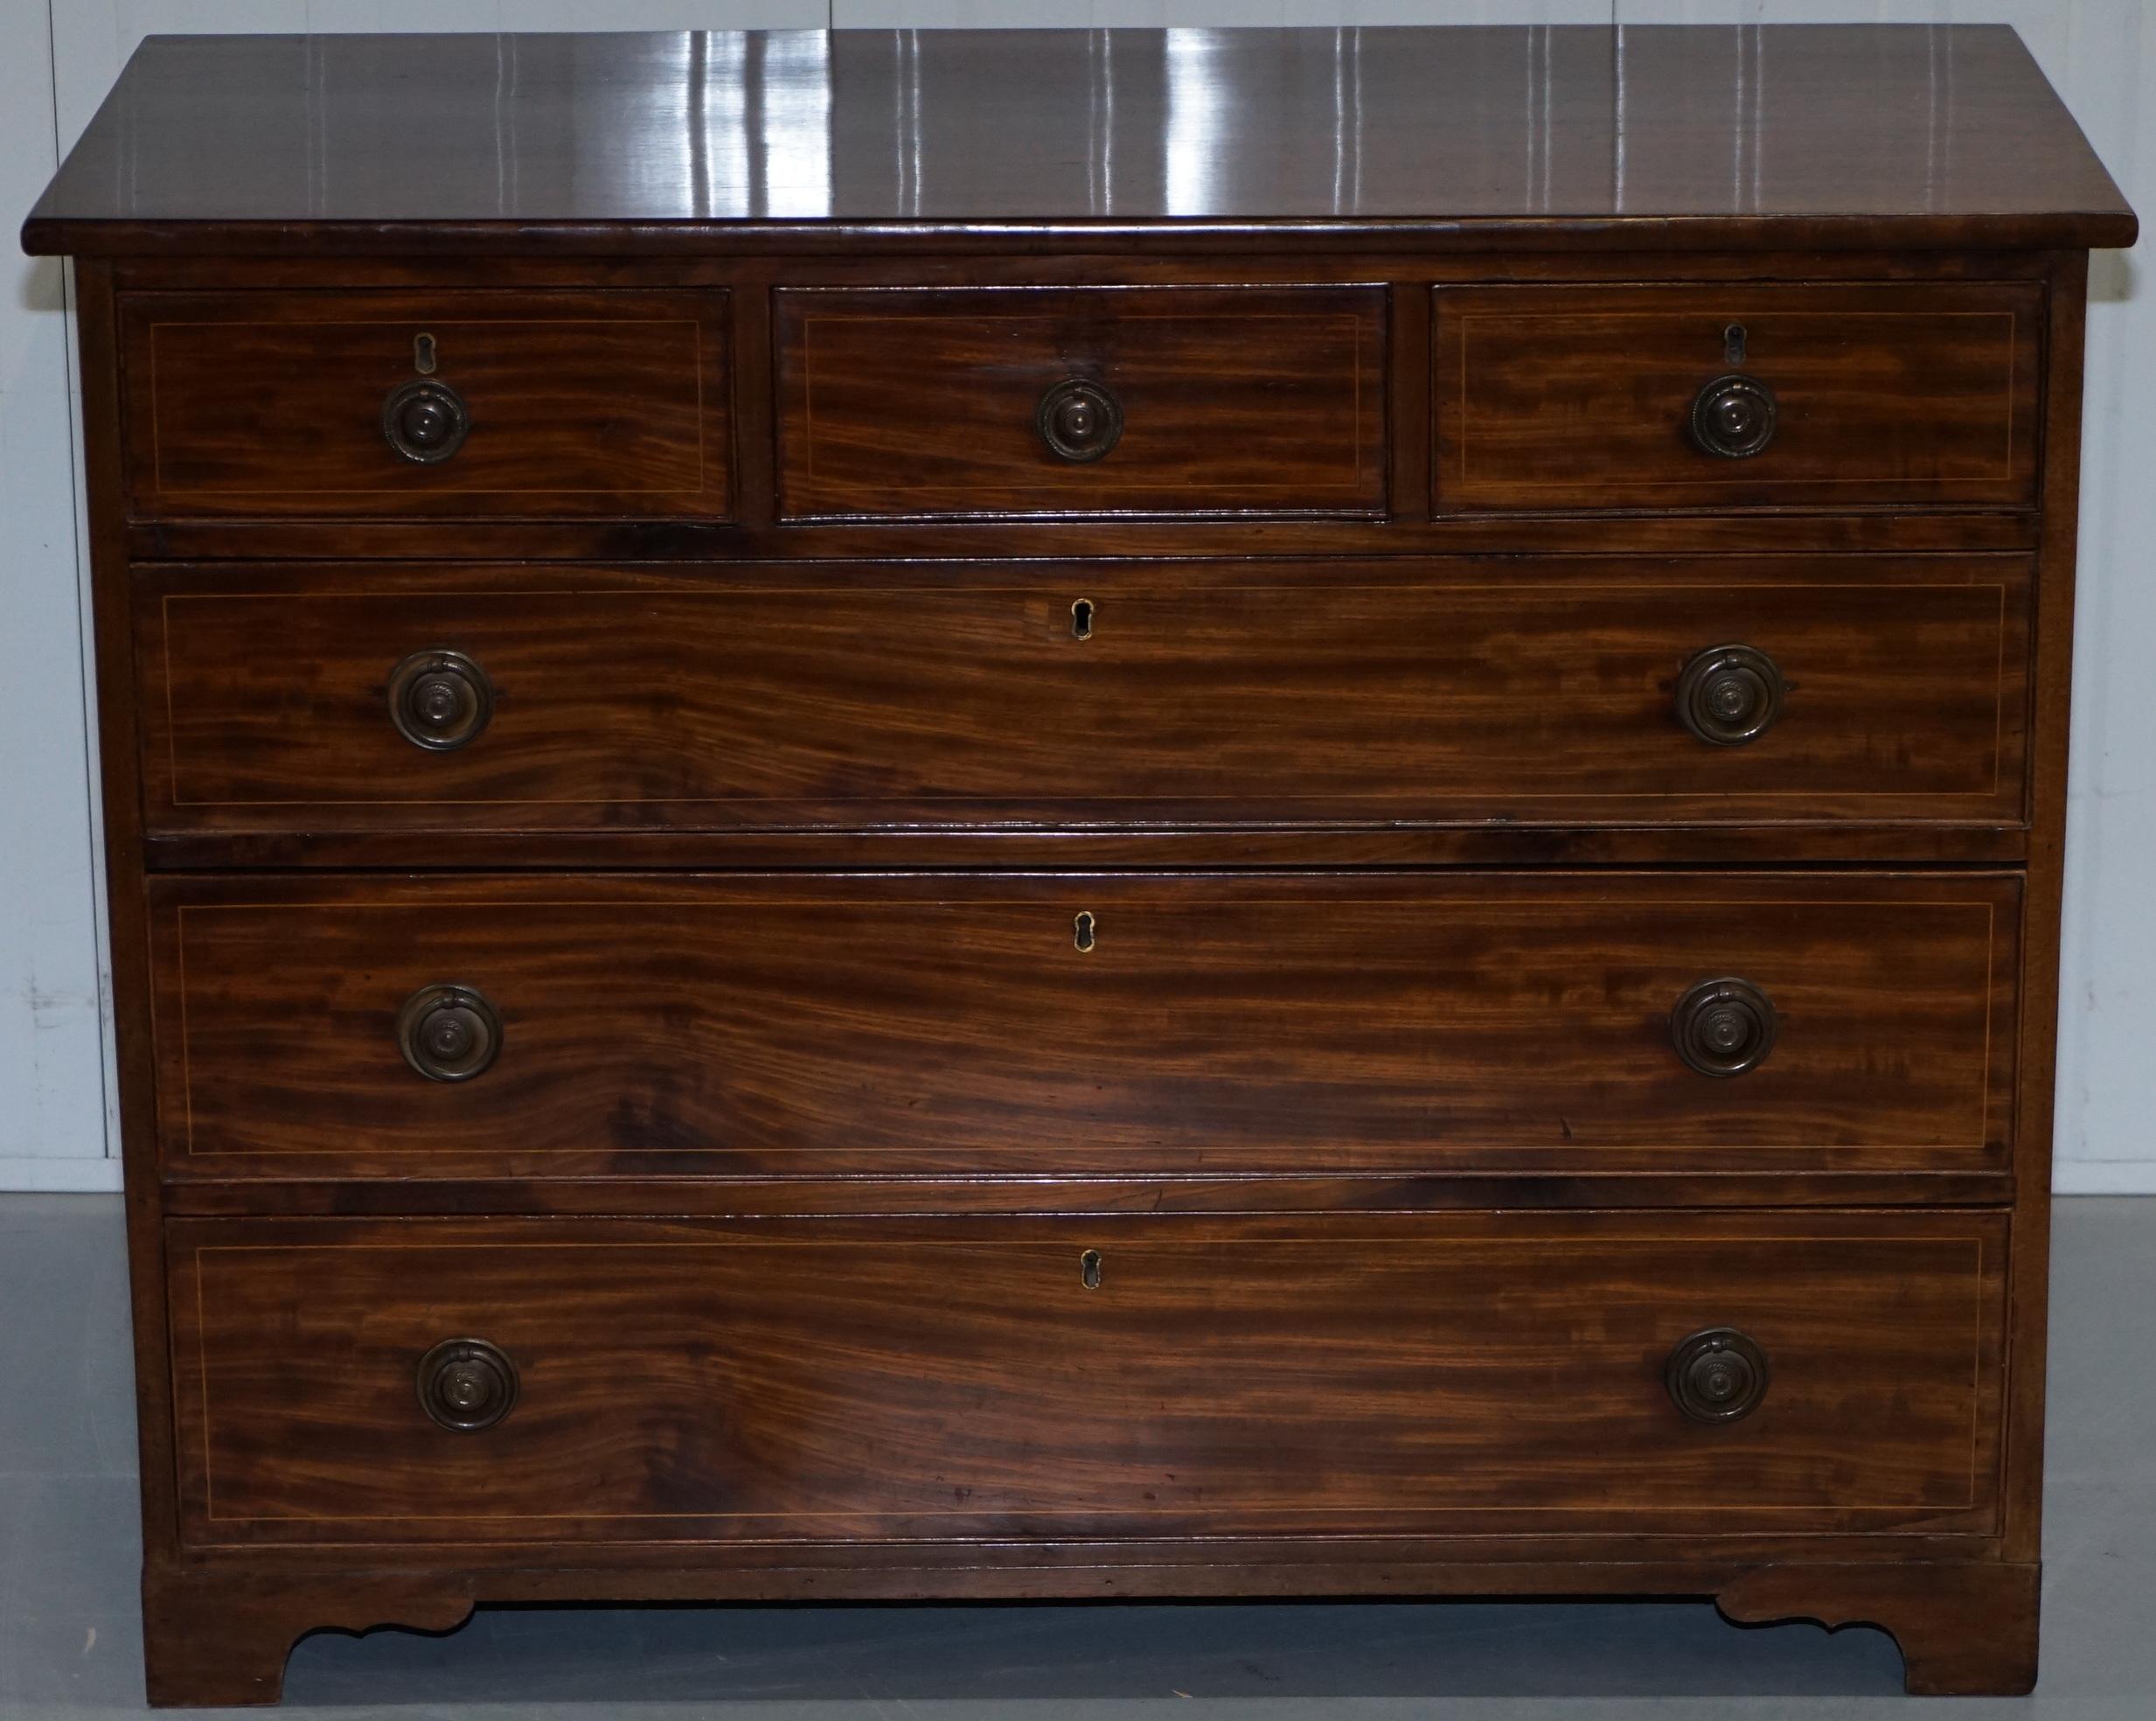 We are delighted to offer for sale this lovely circa 1800 Georgian Mahogany three over three chest of drawers

A very good looking and well made practical chest of drawers, I’ve not seen the three over three formation for a long time, they are